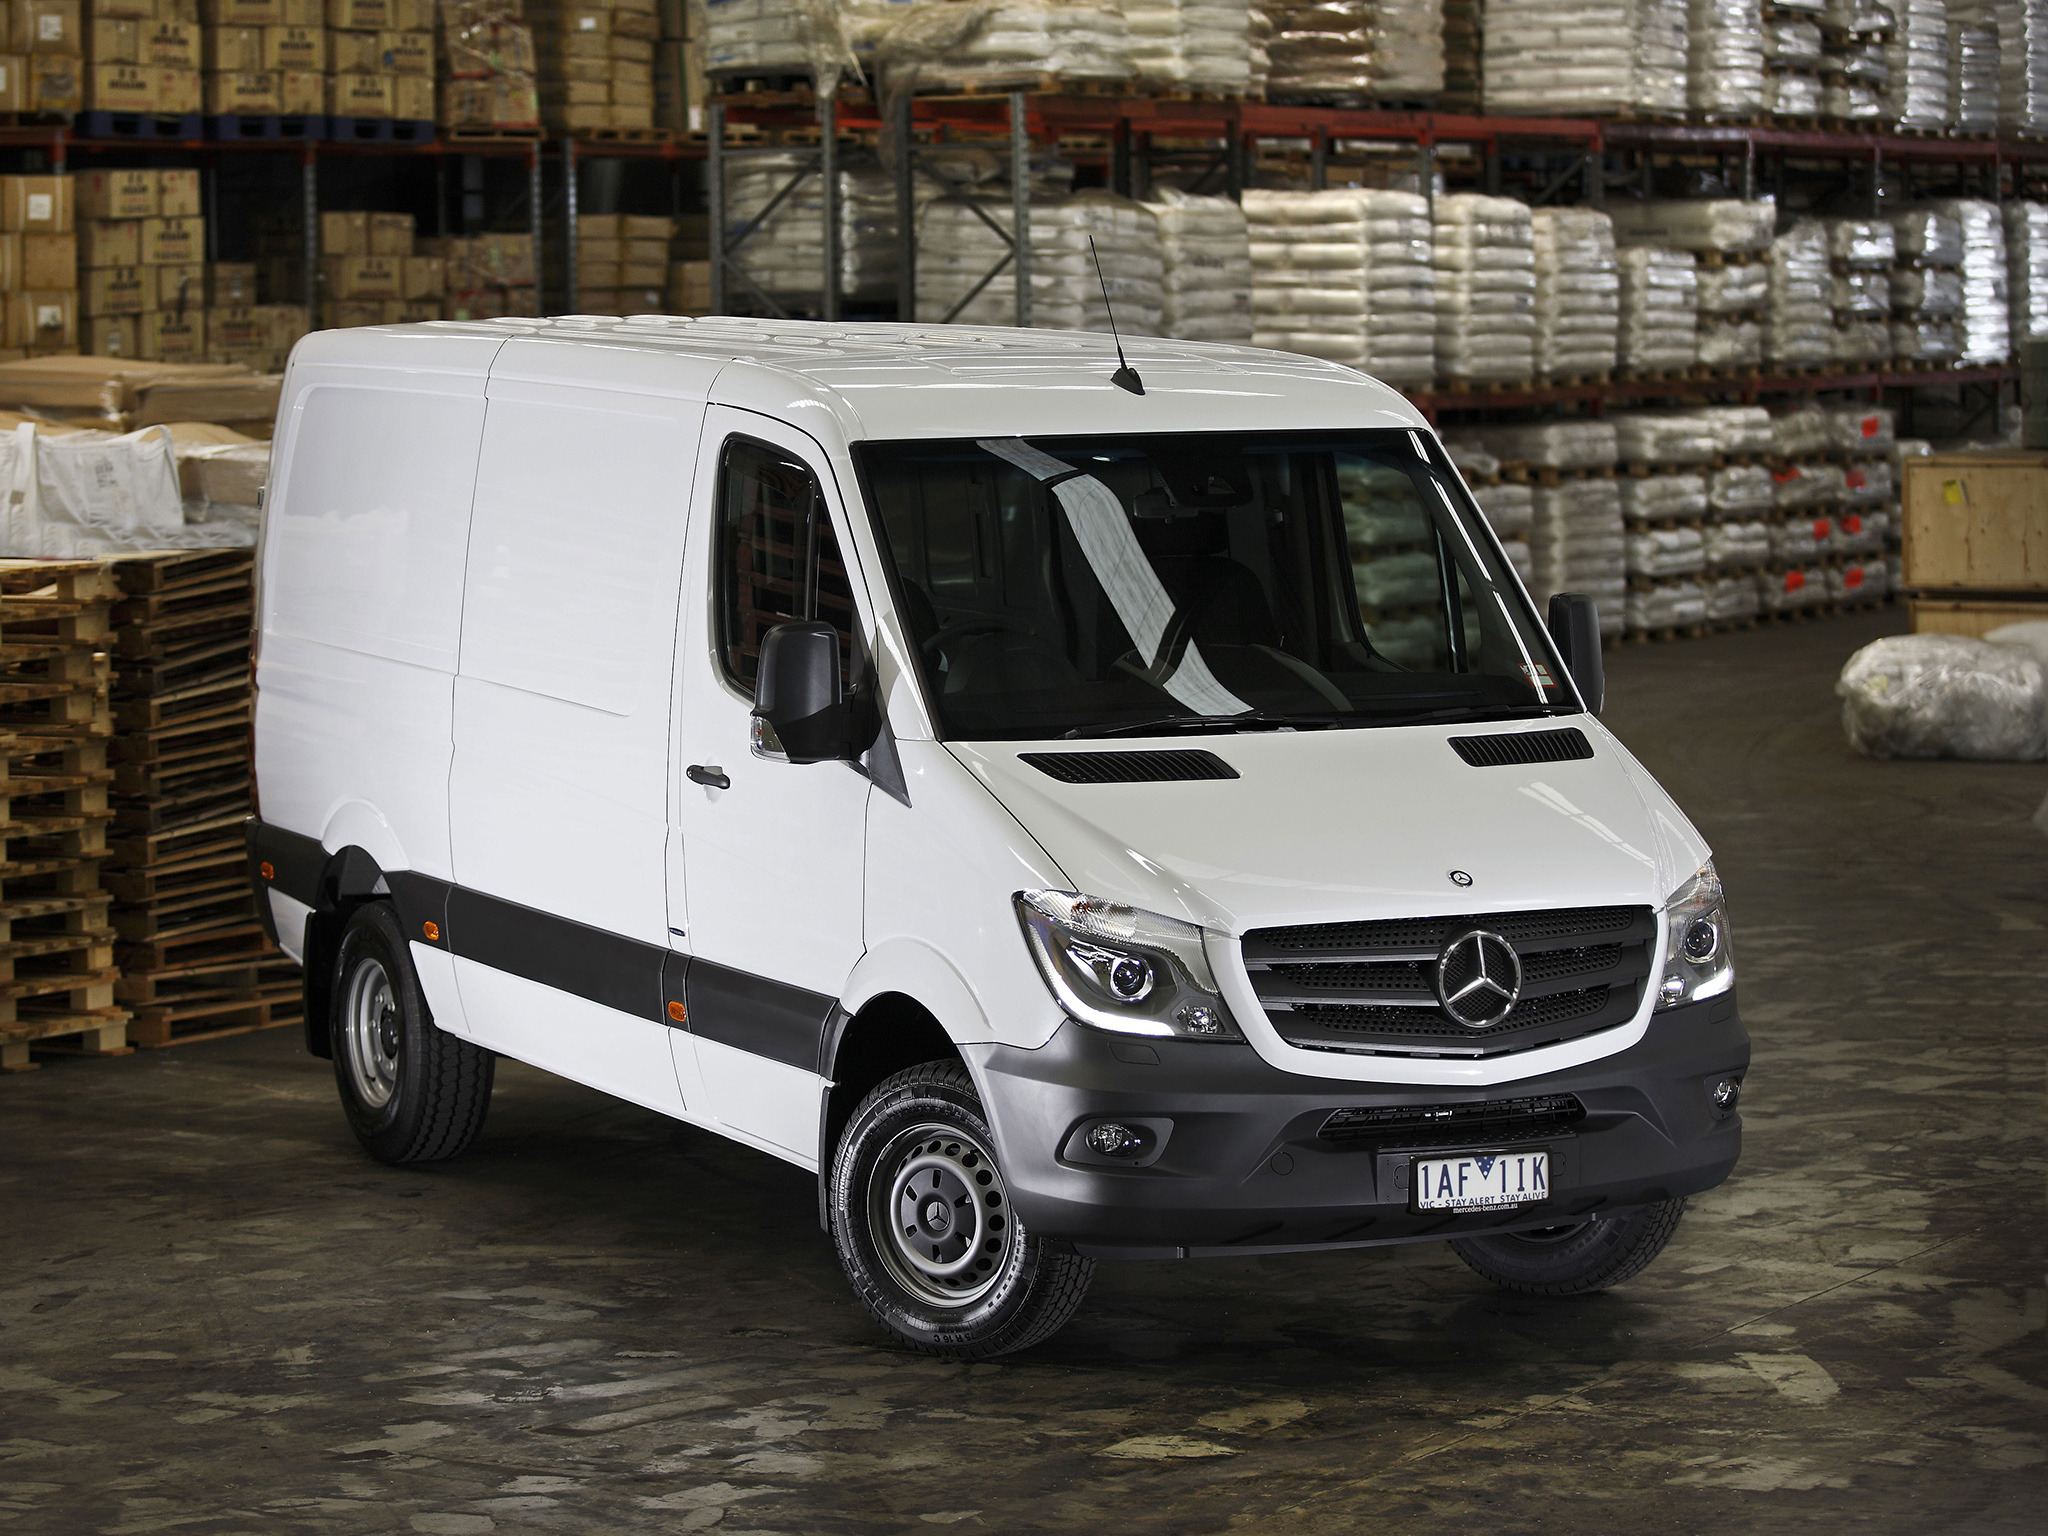 Mercedes-Benz Sprinter 416 2013 - Technical specifications